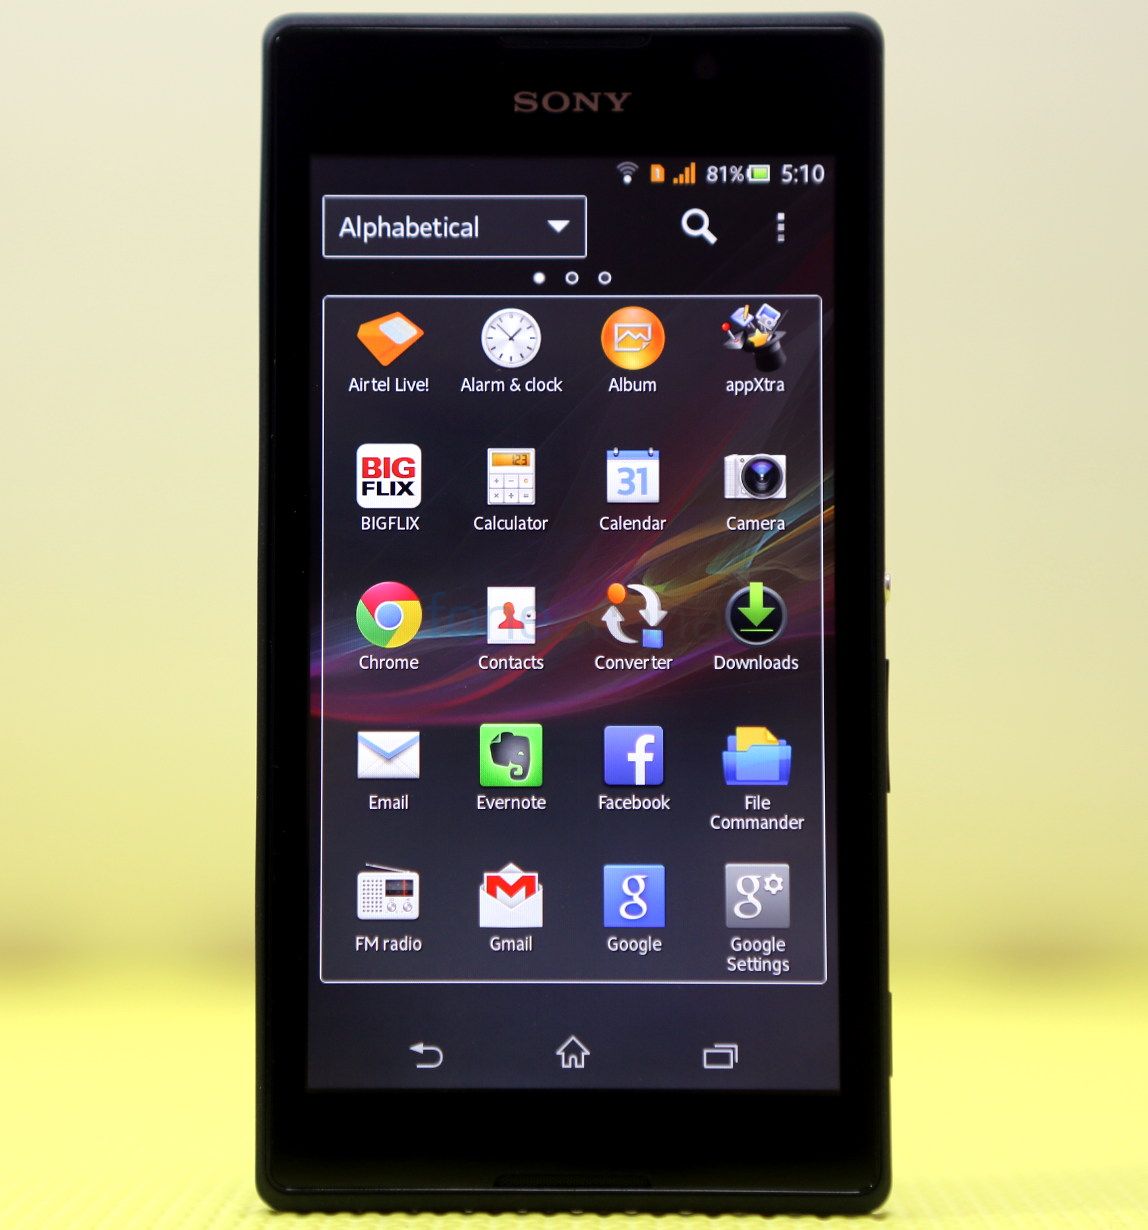 how to flash sony xperia c2305 with setool